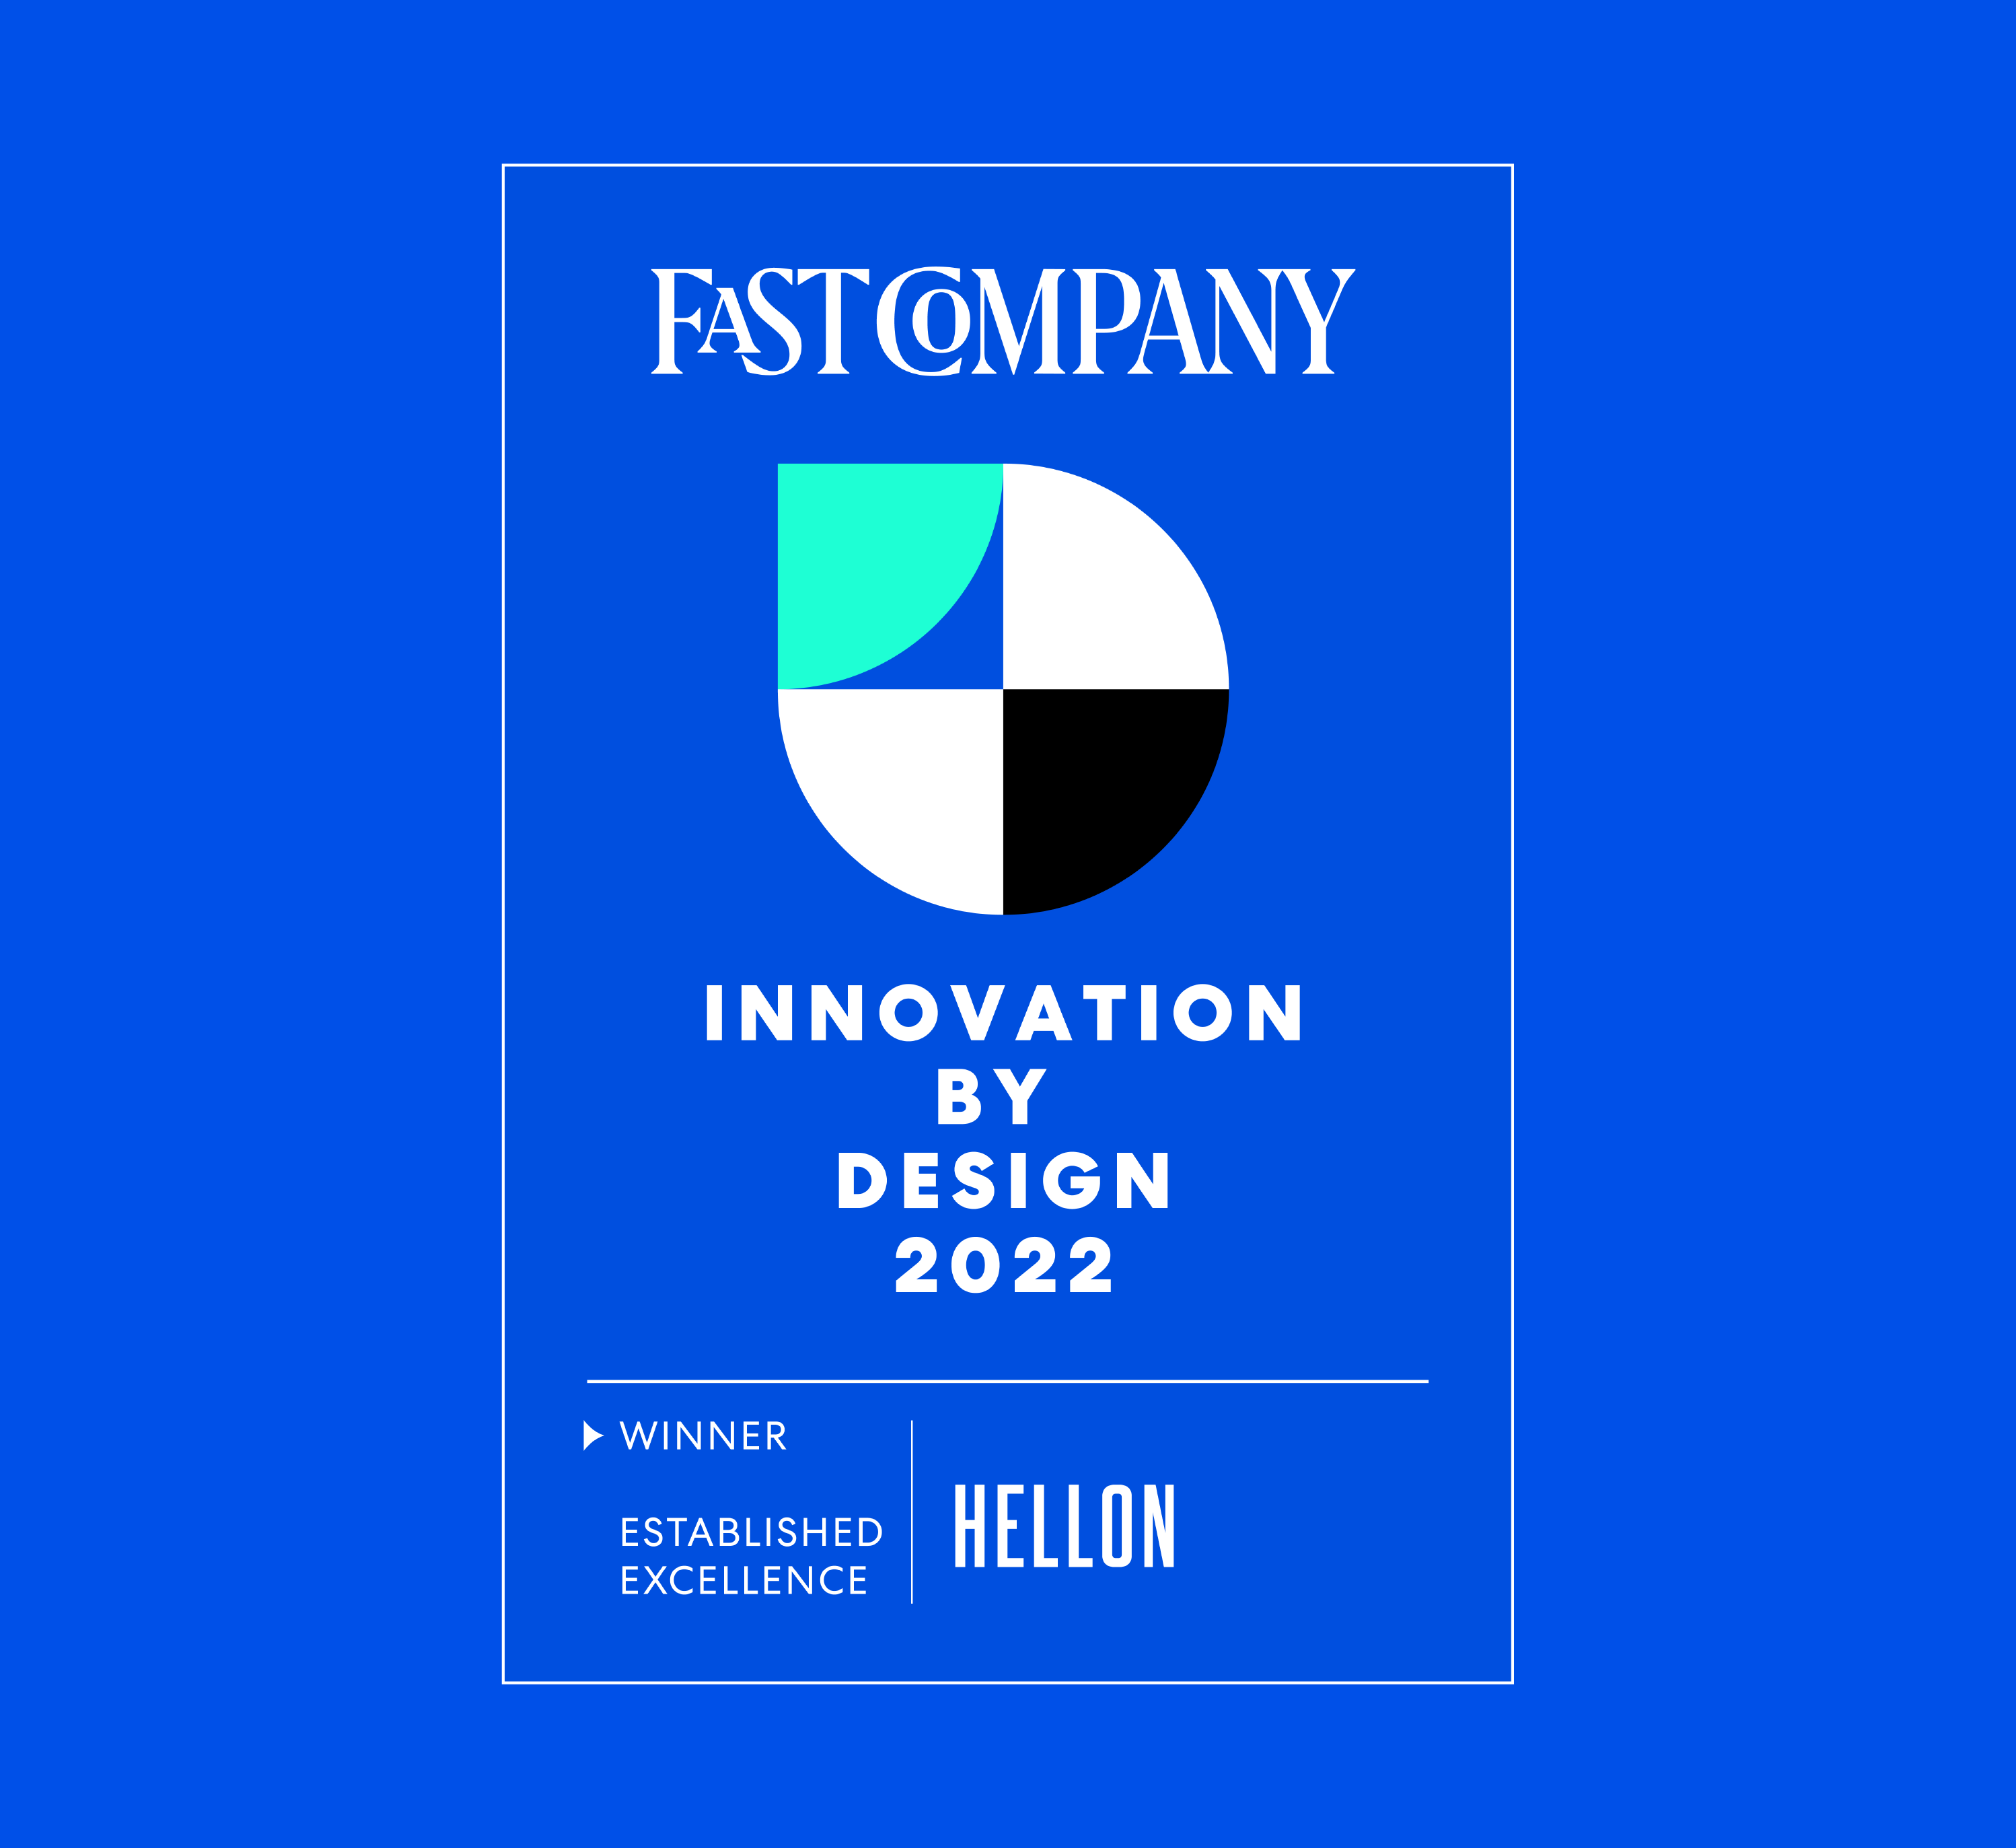 Fast Company has honoured strategic design agency Hellon as a winner and two-time honorable mention in Fast Company’s 2022 Innovation by Design Awards